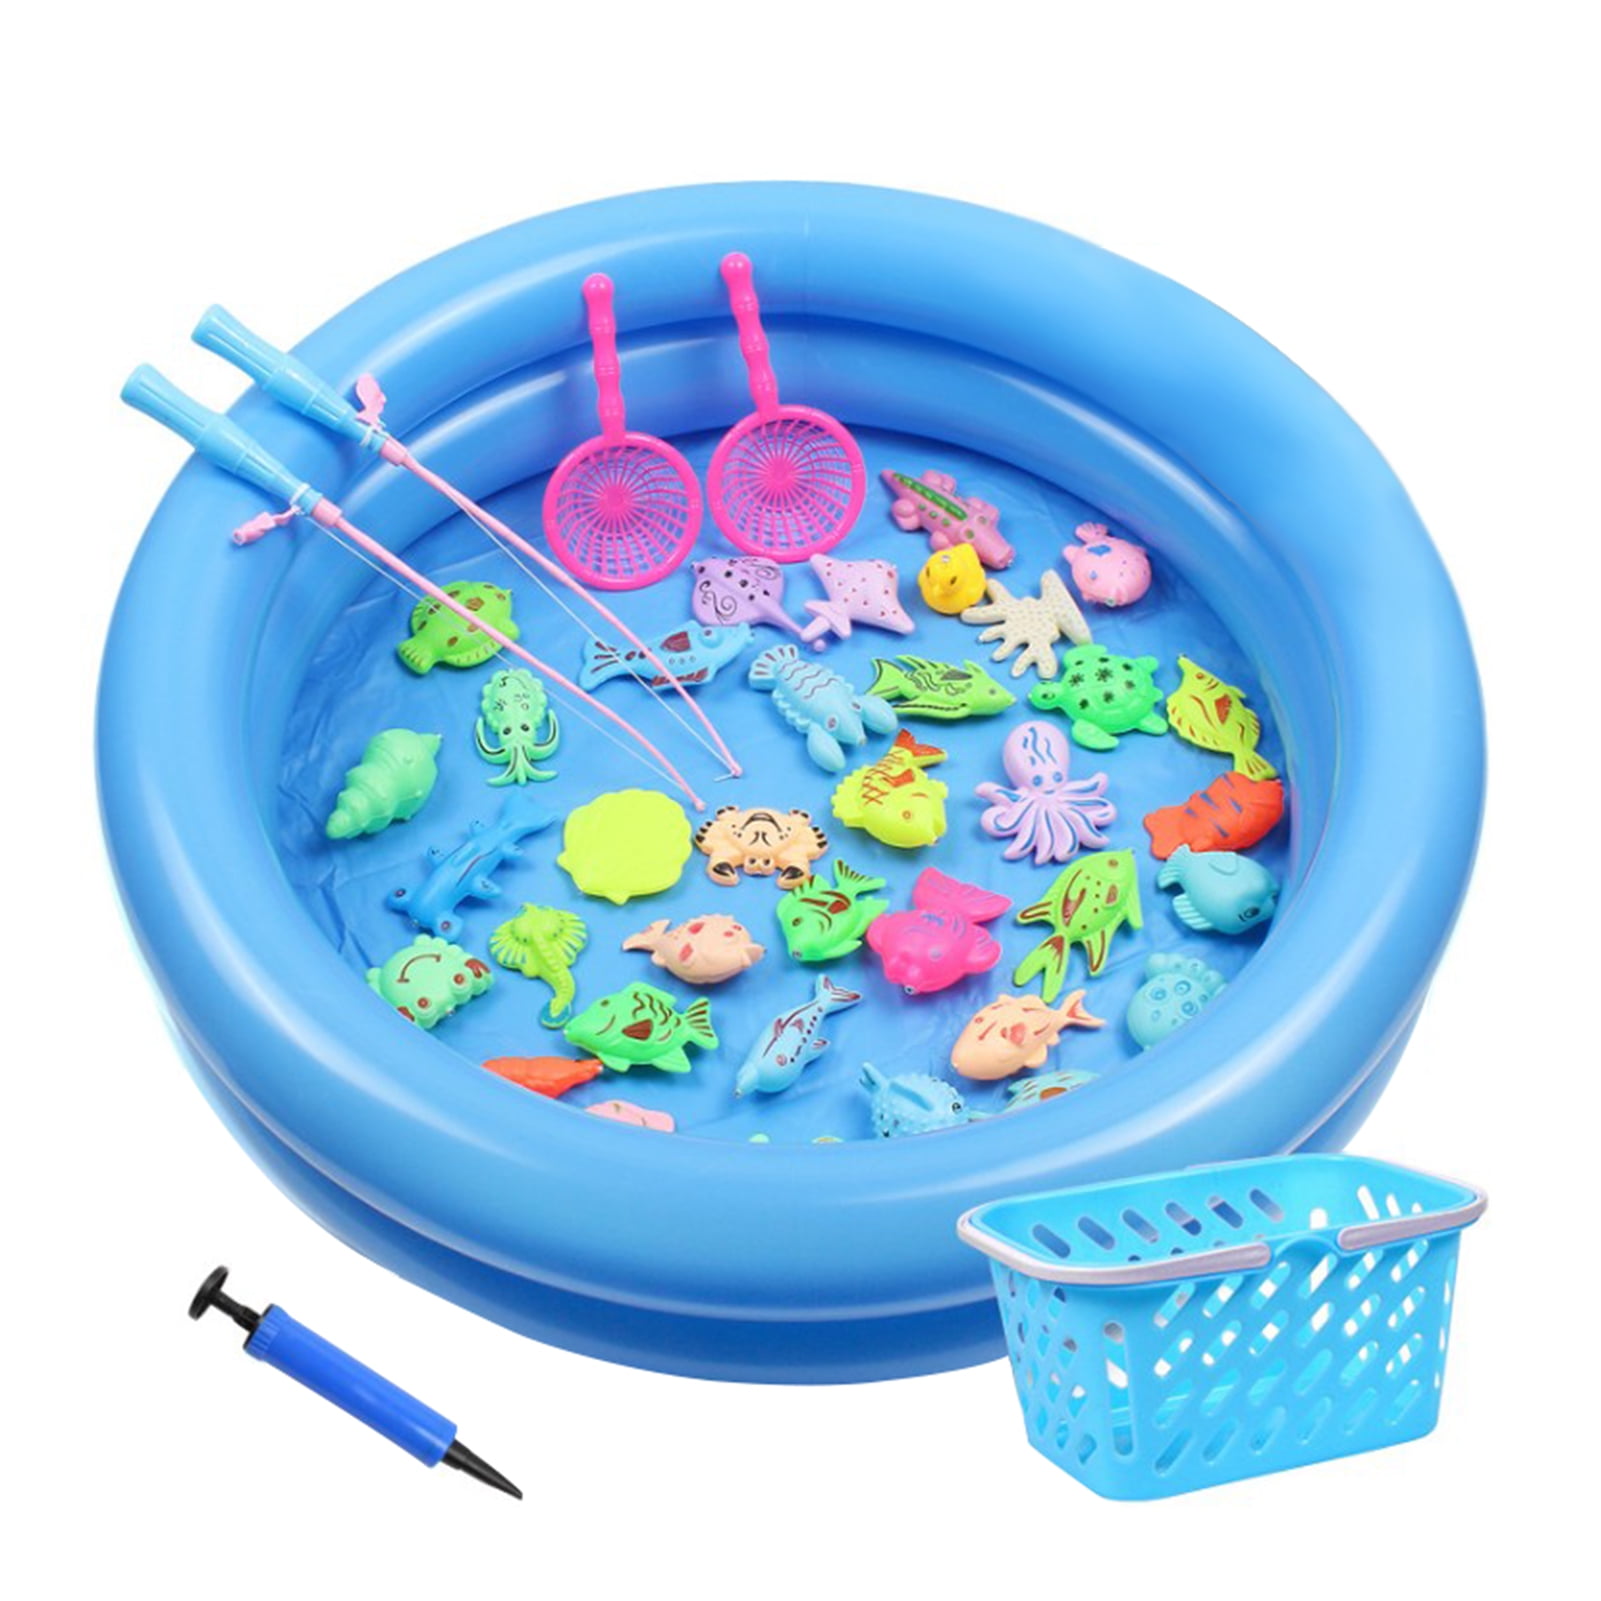 Details about   MAGNETIC FISHING GAME NEW NET & BUCKET 12 PLASTIC SEA CREATURES ROD